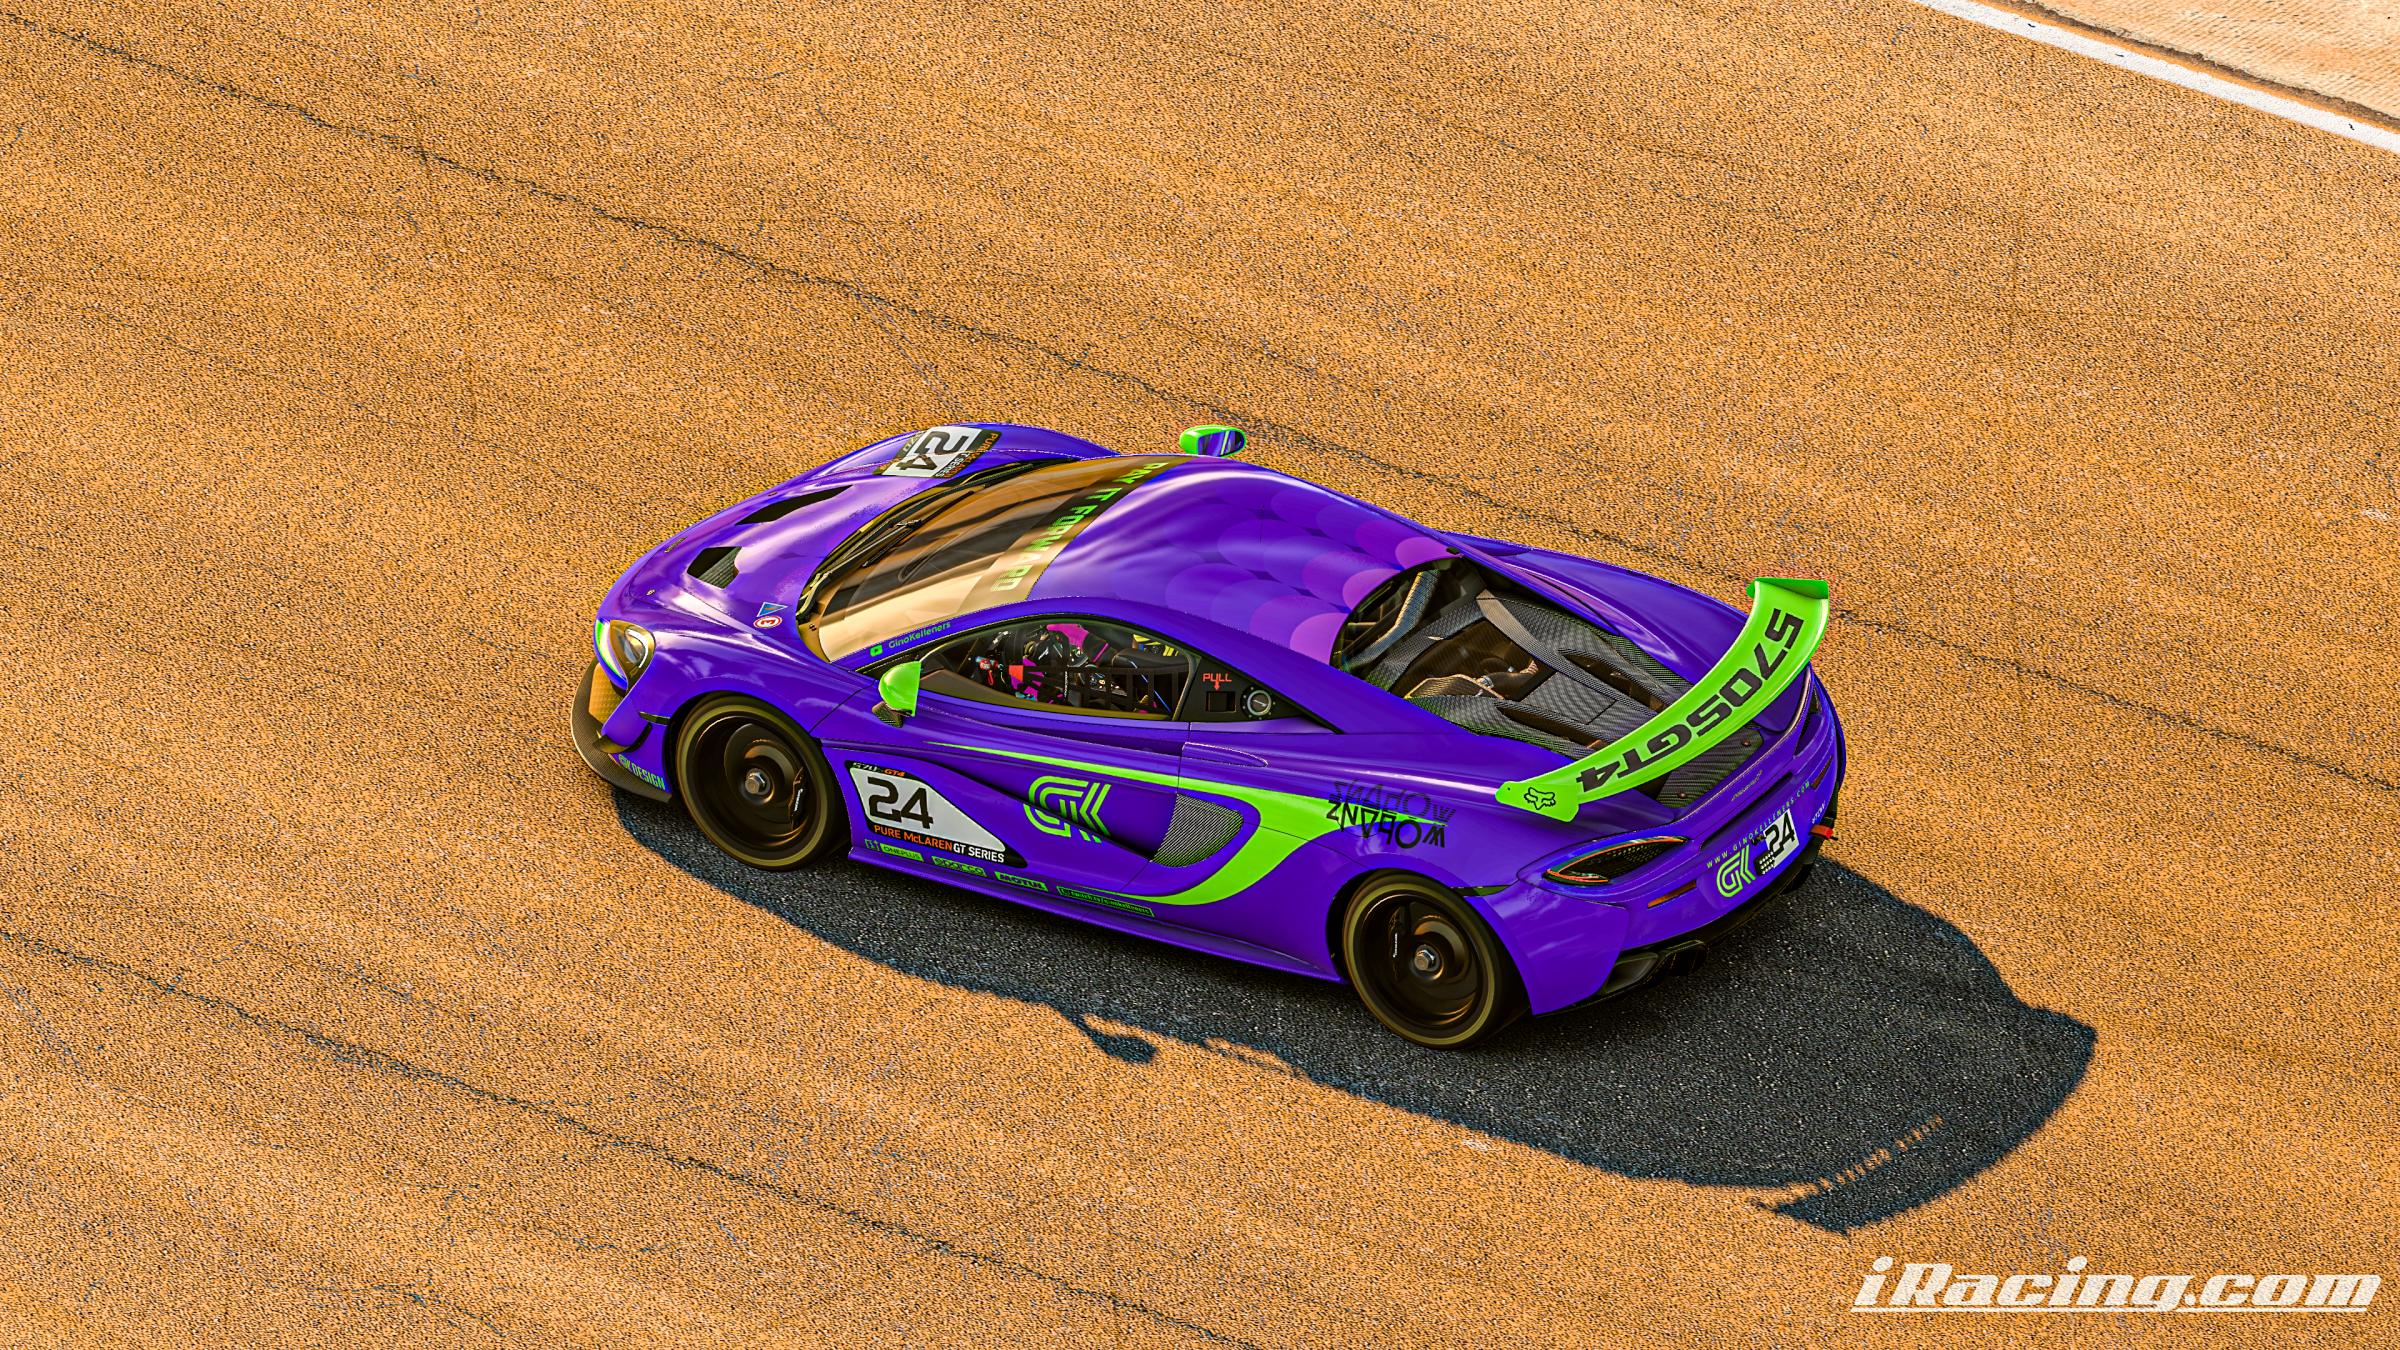 Preview of Ningaloo Reef Shark Livery - Mclaren 570S GT4 by Gino Kelleners